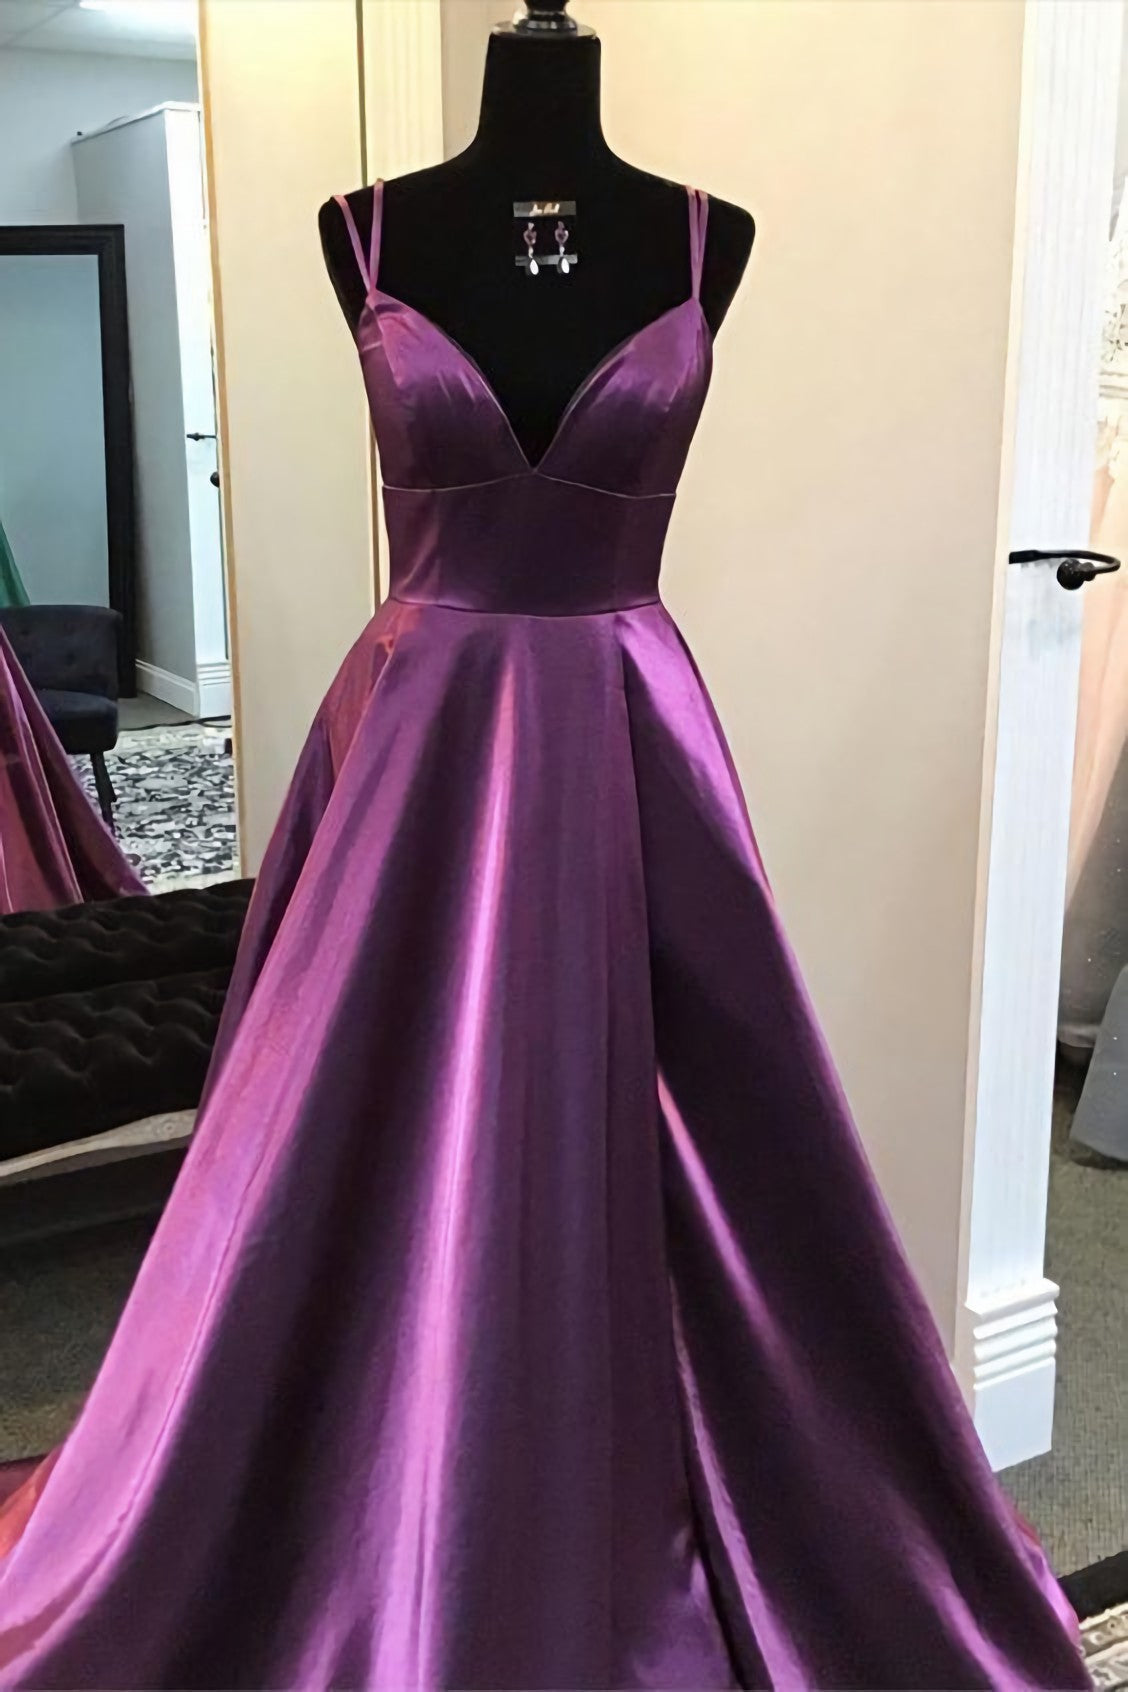 Party Dress Afternoon Tea, Simply Elegant Purple Prom Dress With Double Straps 2444